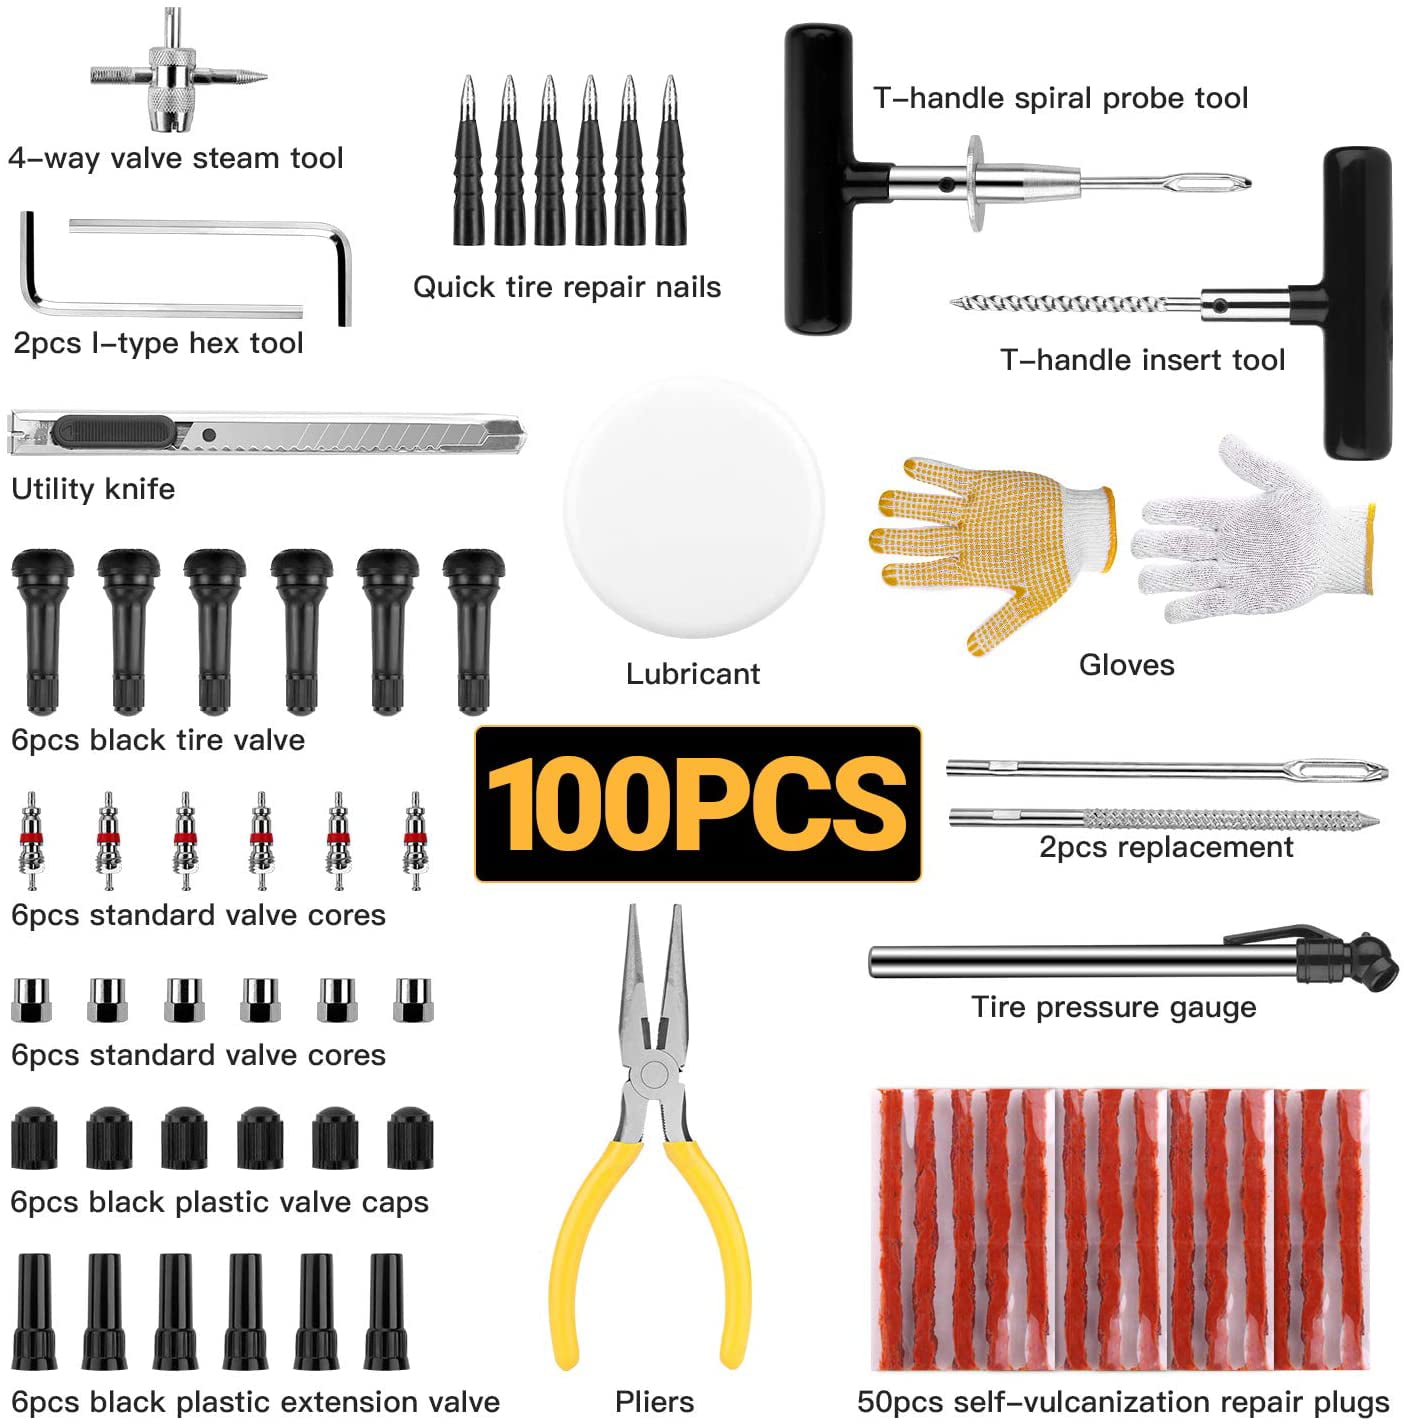 ORCISH 98Pcs Tire Repair Plug Kit Heavy Duty Flat Tire Repair Kit Universal Tire Repair Tools & Tire Repair Set for Car Motorcycle Truck RV Jeep ATV Tractor Trailer Tire Patch Kits Puncture Repair Kit 